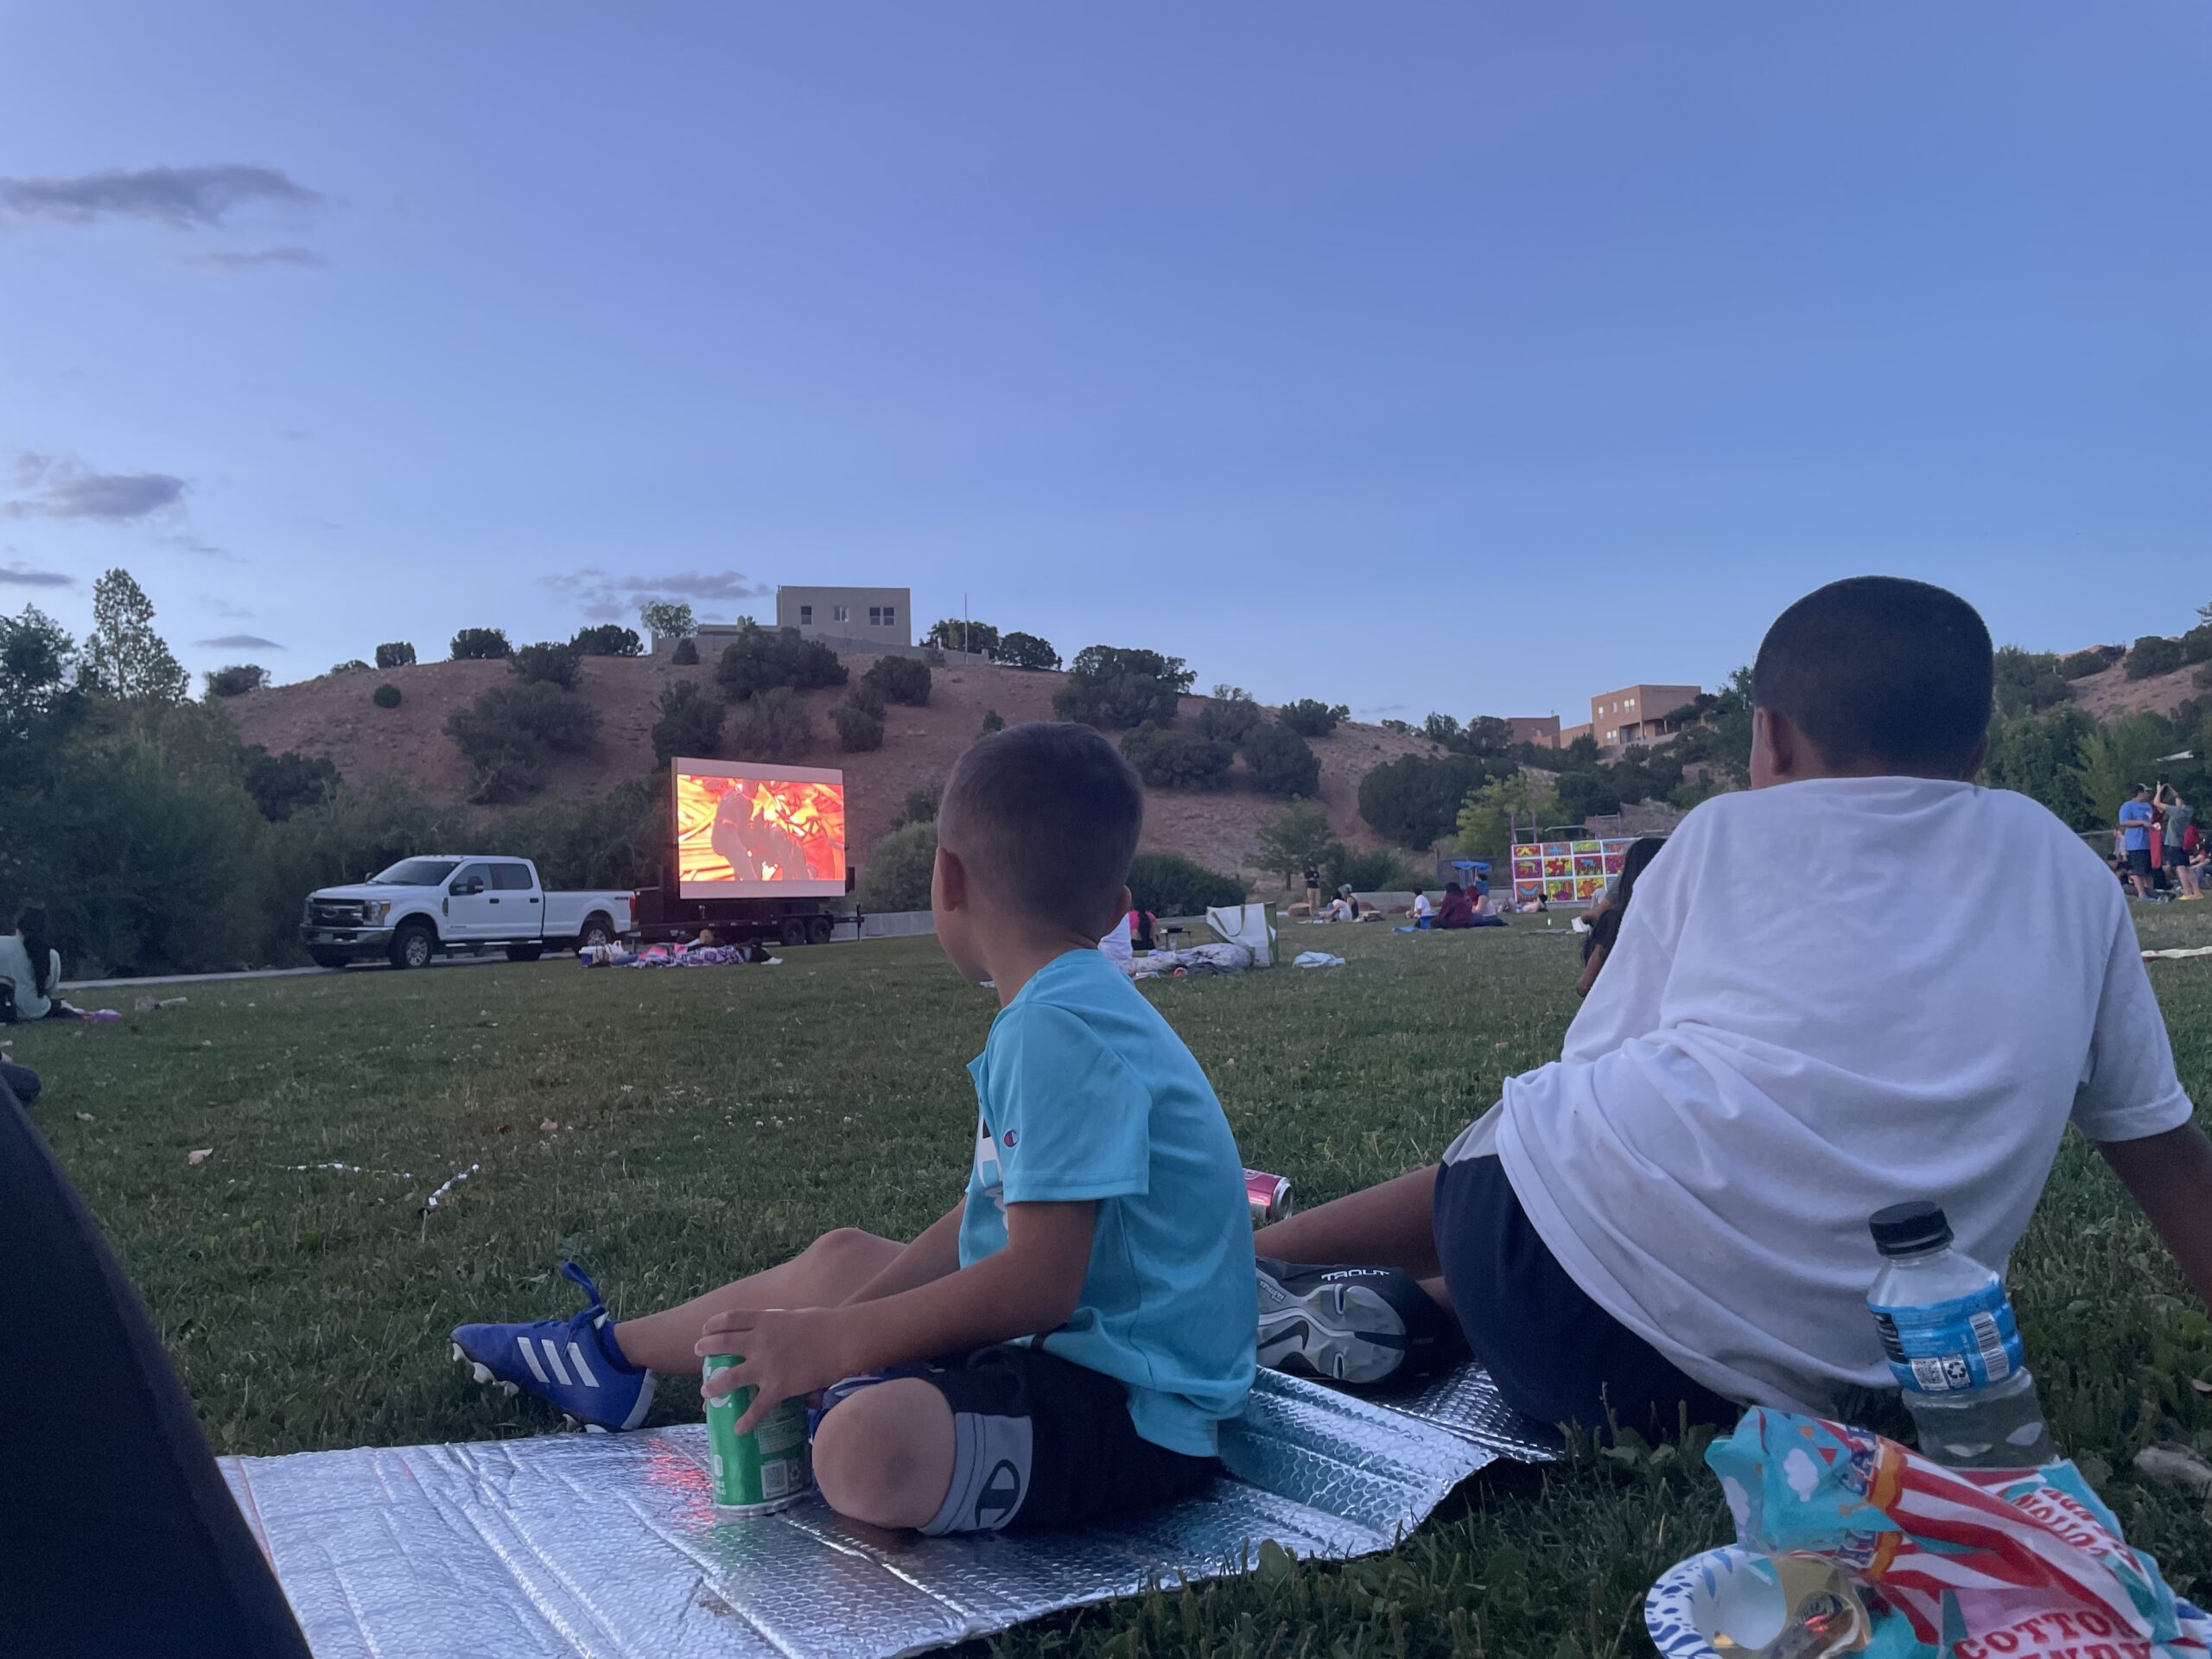 Watching a movie at sunset with Brother (Santa Fe Public Schools).